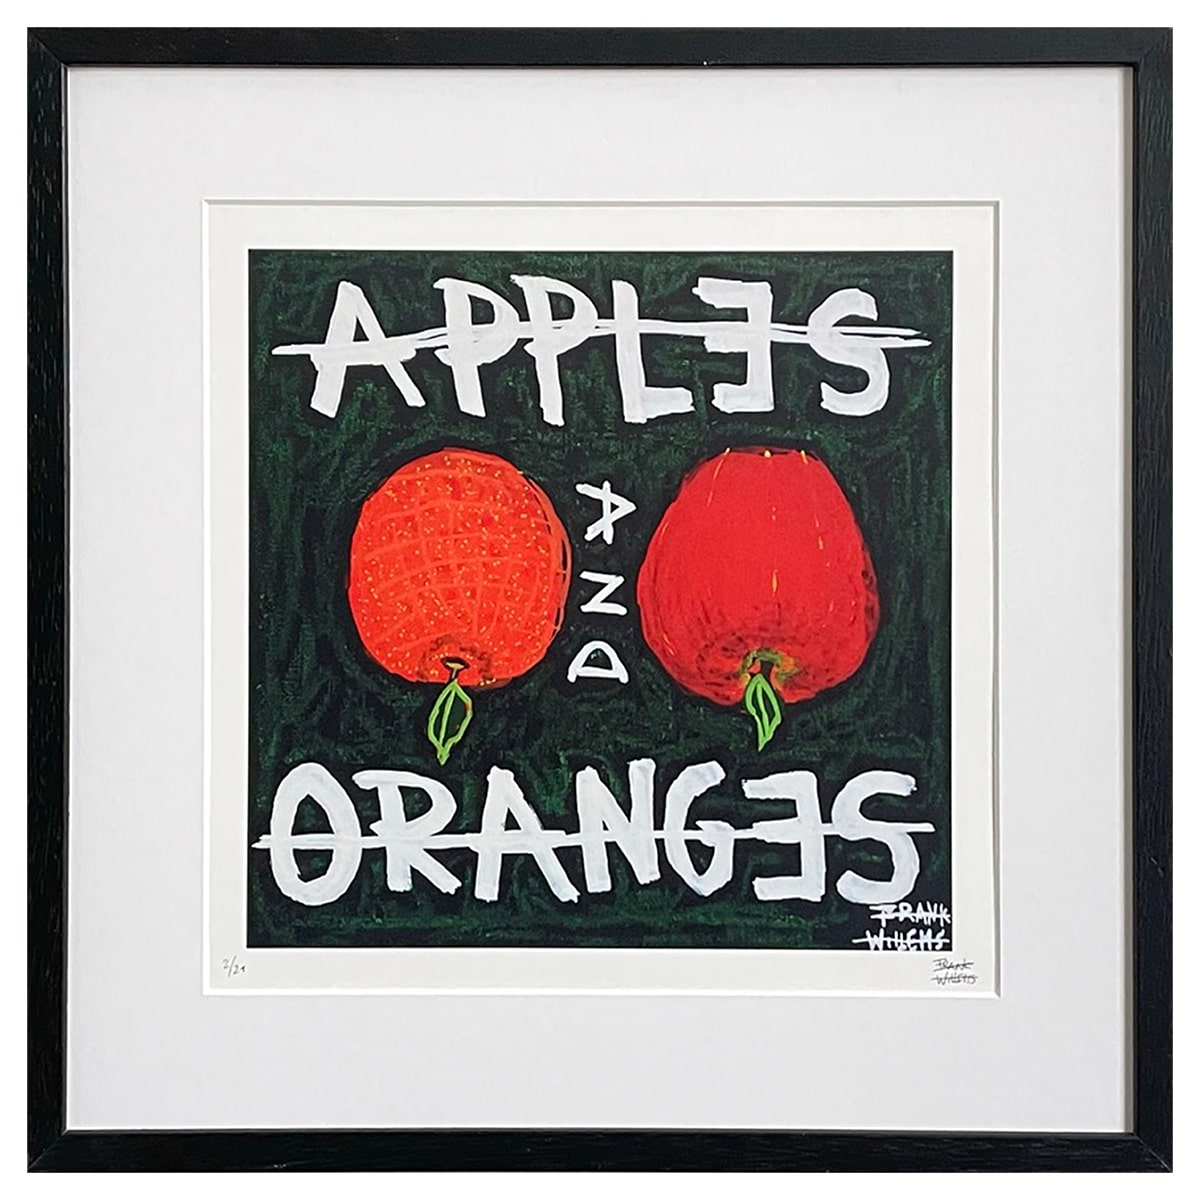 Limited Edt Art Prints - APPLES AND ORANGES - Frank Willems